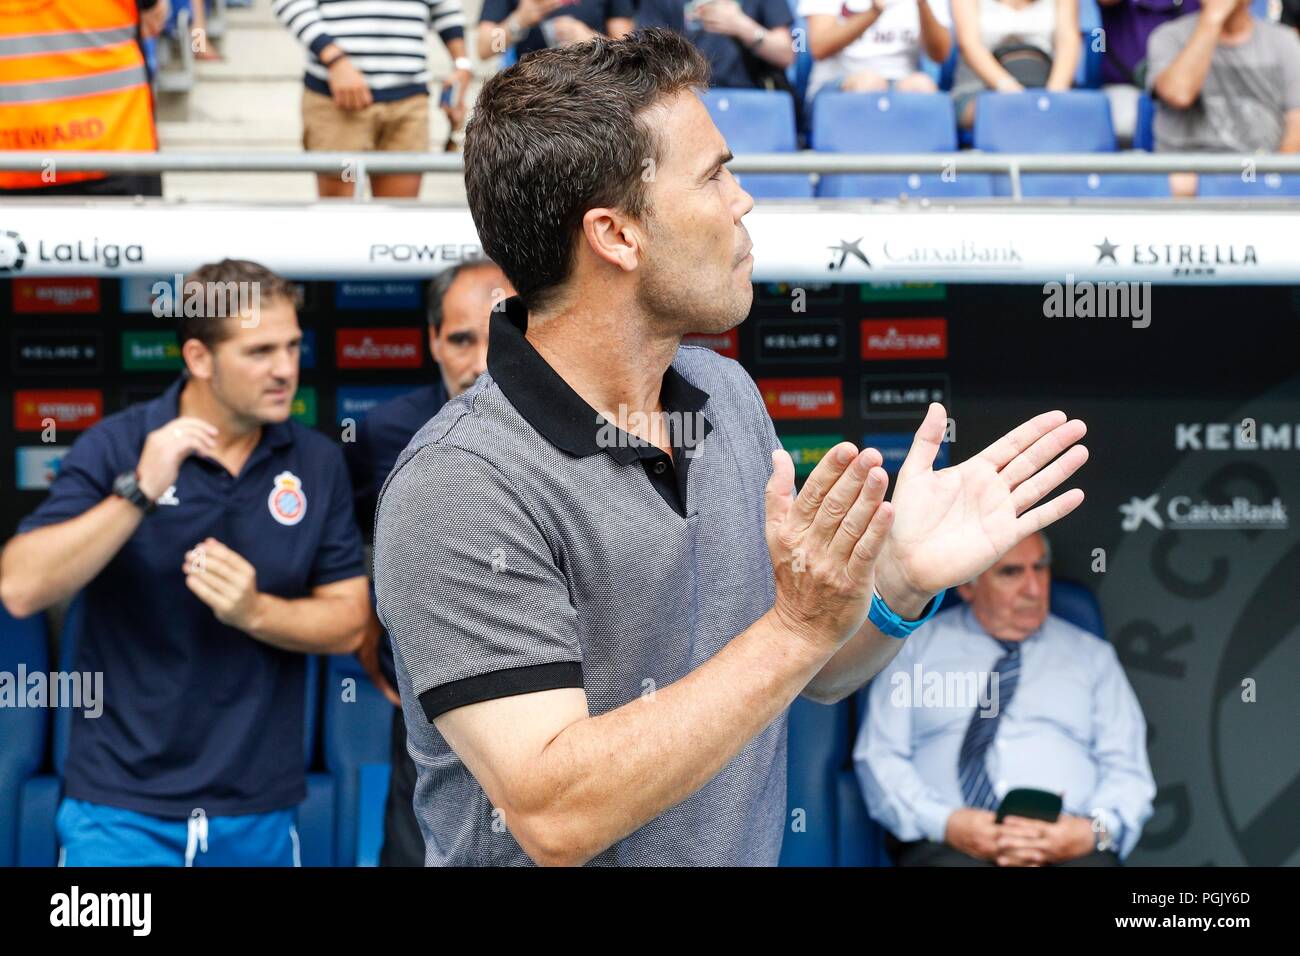 SPAIN - 26th of August: RCD Espanyol manager Joan Francesc Ferrer Sicilia, 'Rubi' during the match between RCD Espanyol v Valencia for the round 2 of the Liga Santander, played at Cornella-El Prat Stadium on 26th August 2018 in Barcelona, Spain. (Credit: Urbanandsport / Cordon Press) Credit: CORDON PRESS/Alamy Live News Stock Photo